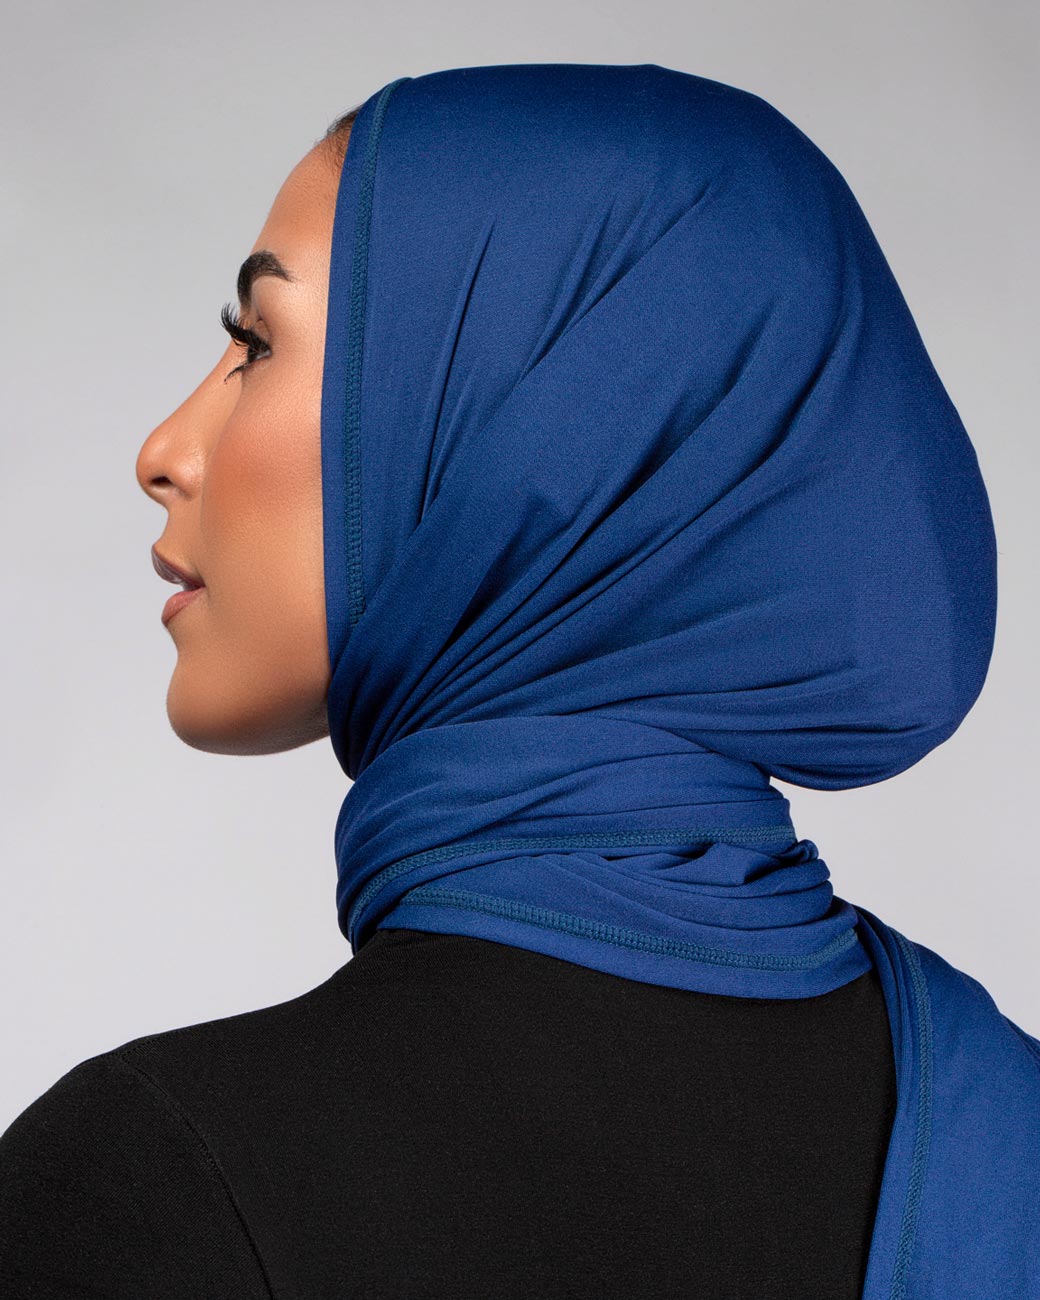 Cool Dry Shawl 2.0 in bold blue by Veil Garments. Sports hijab collection.